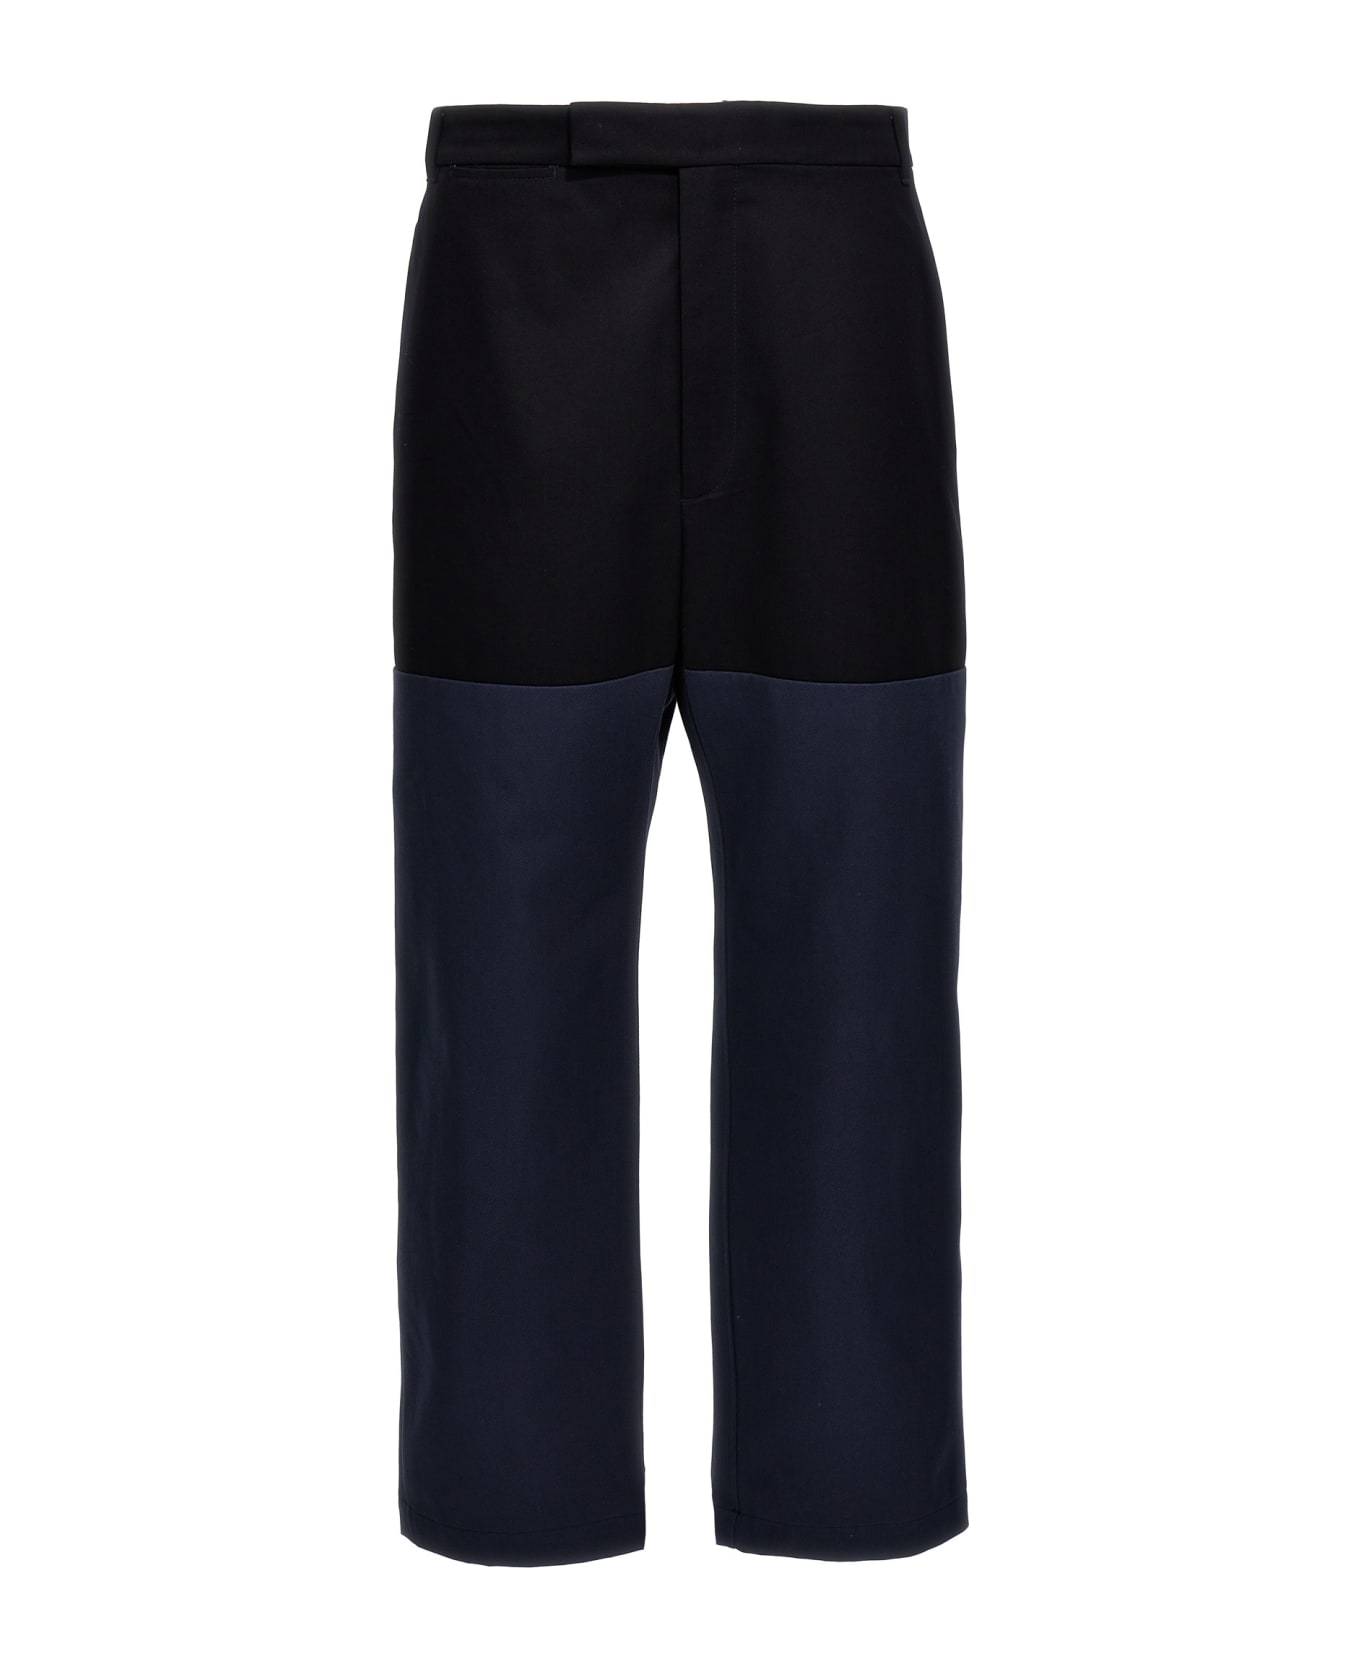 Thom Browne 'unconstructed Combo' Pants - Blue ボトムス